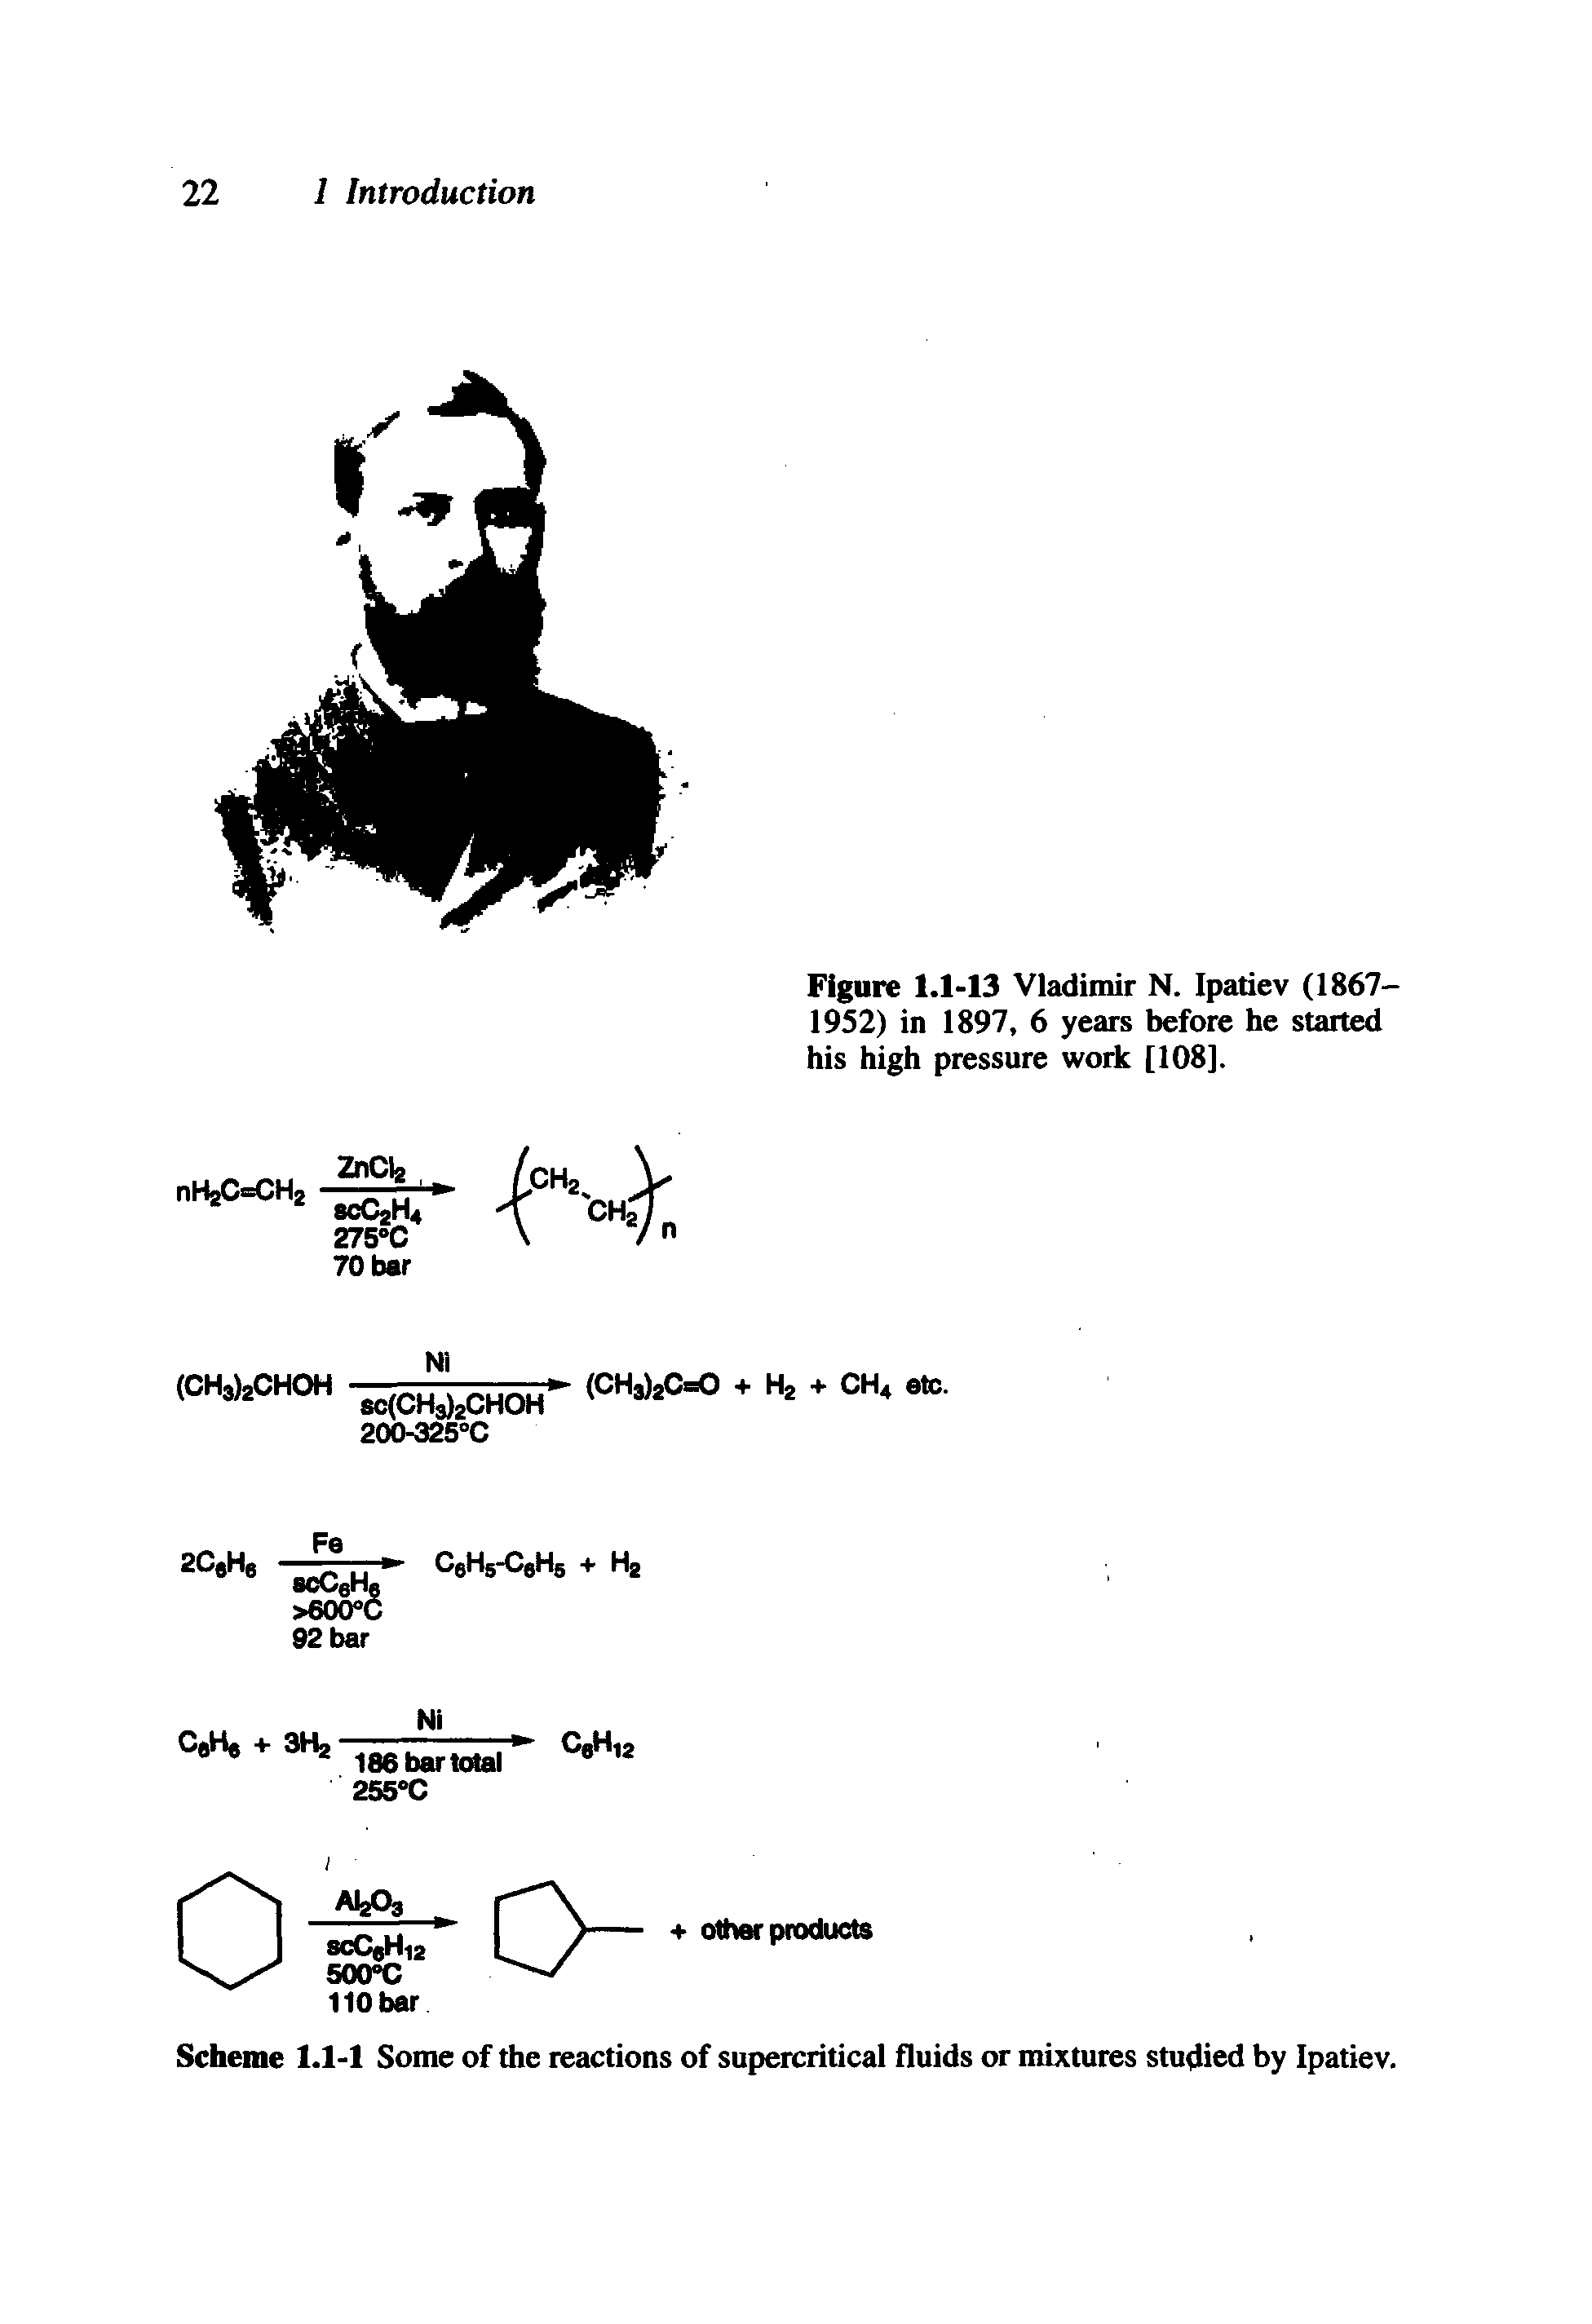 Scheme 1.1-1 Some of the reactions of supercritical fluids or mixtures studied by Ipatiev.